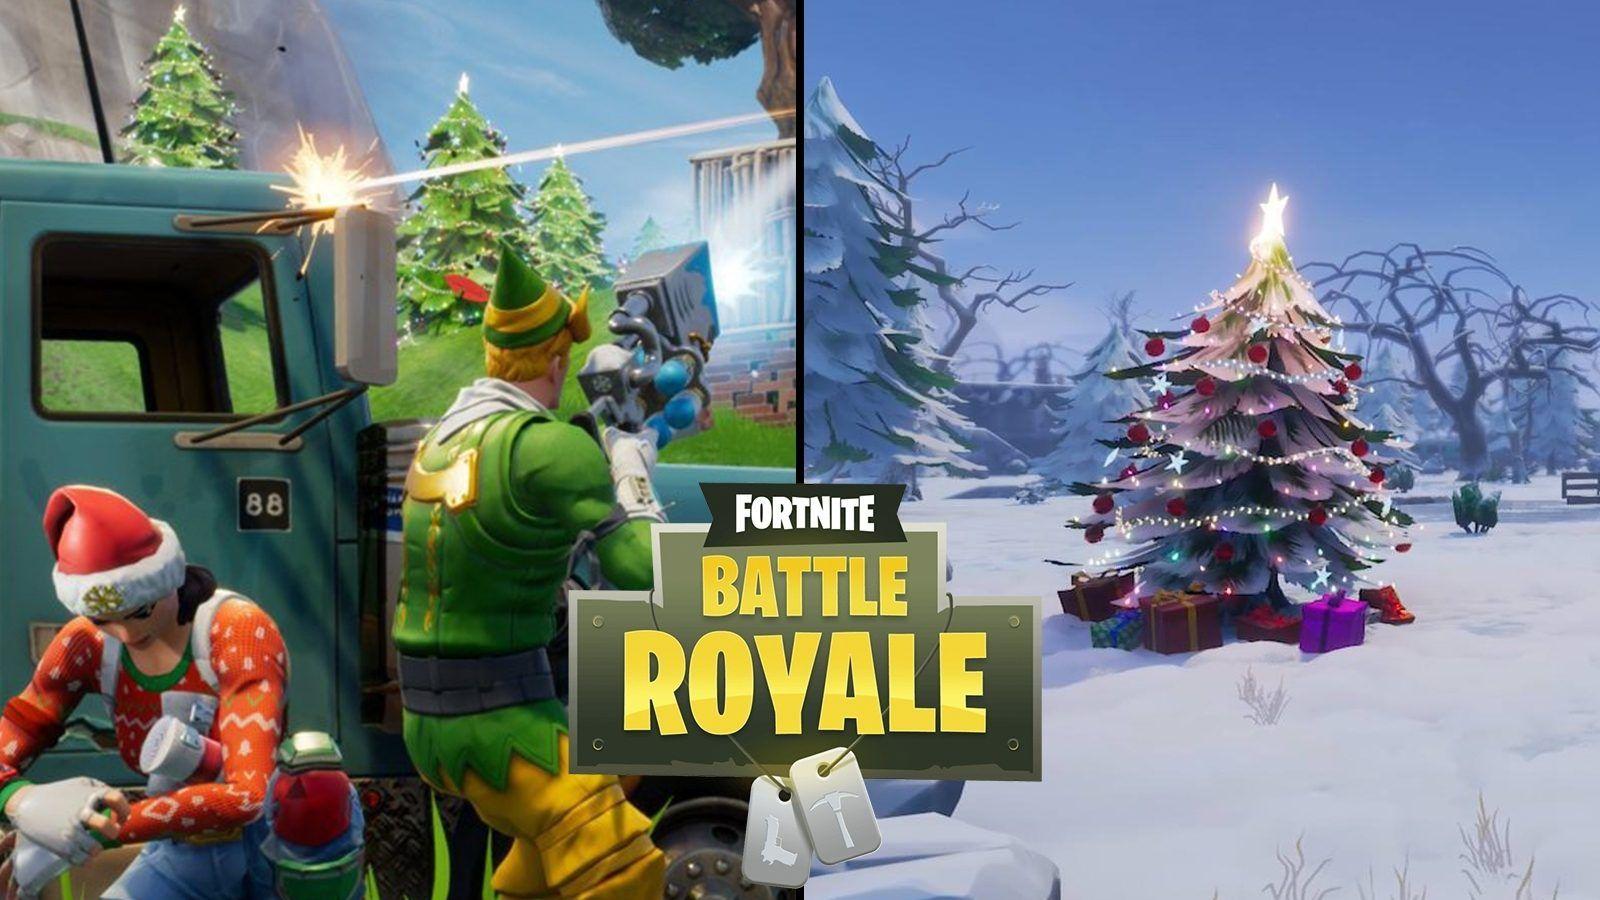 This Amazing Fan Made Fortnite Christmas Skin Will Get You In